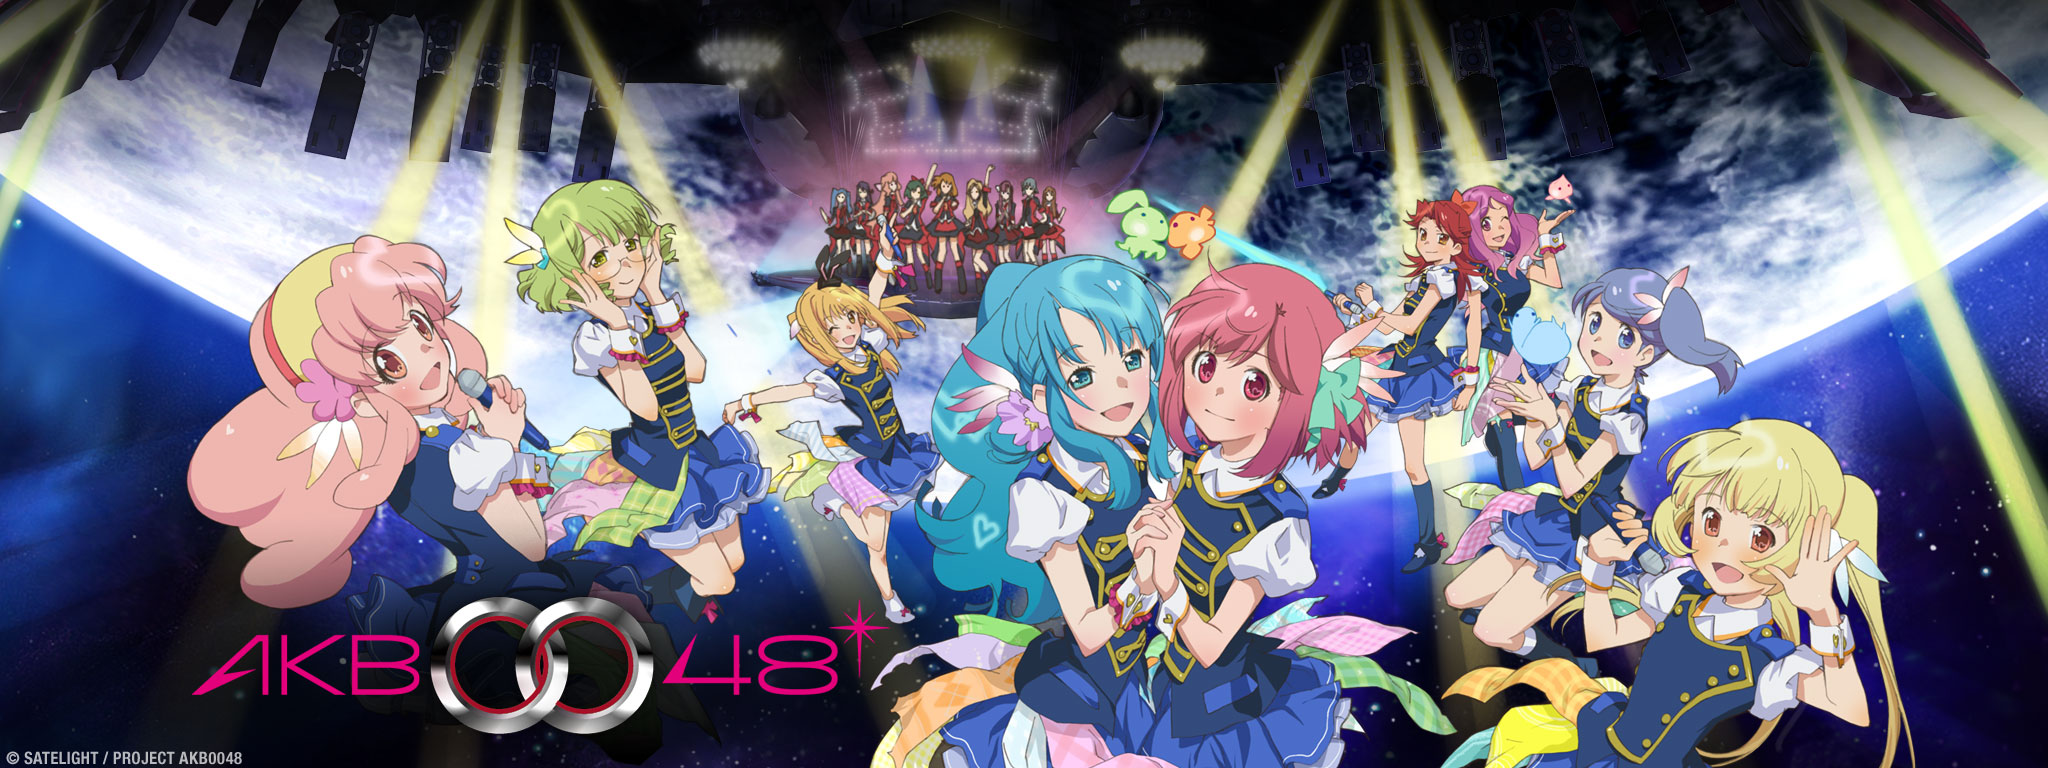 Title Art for AKB0048 - Next Stage